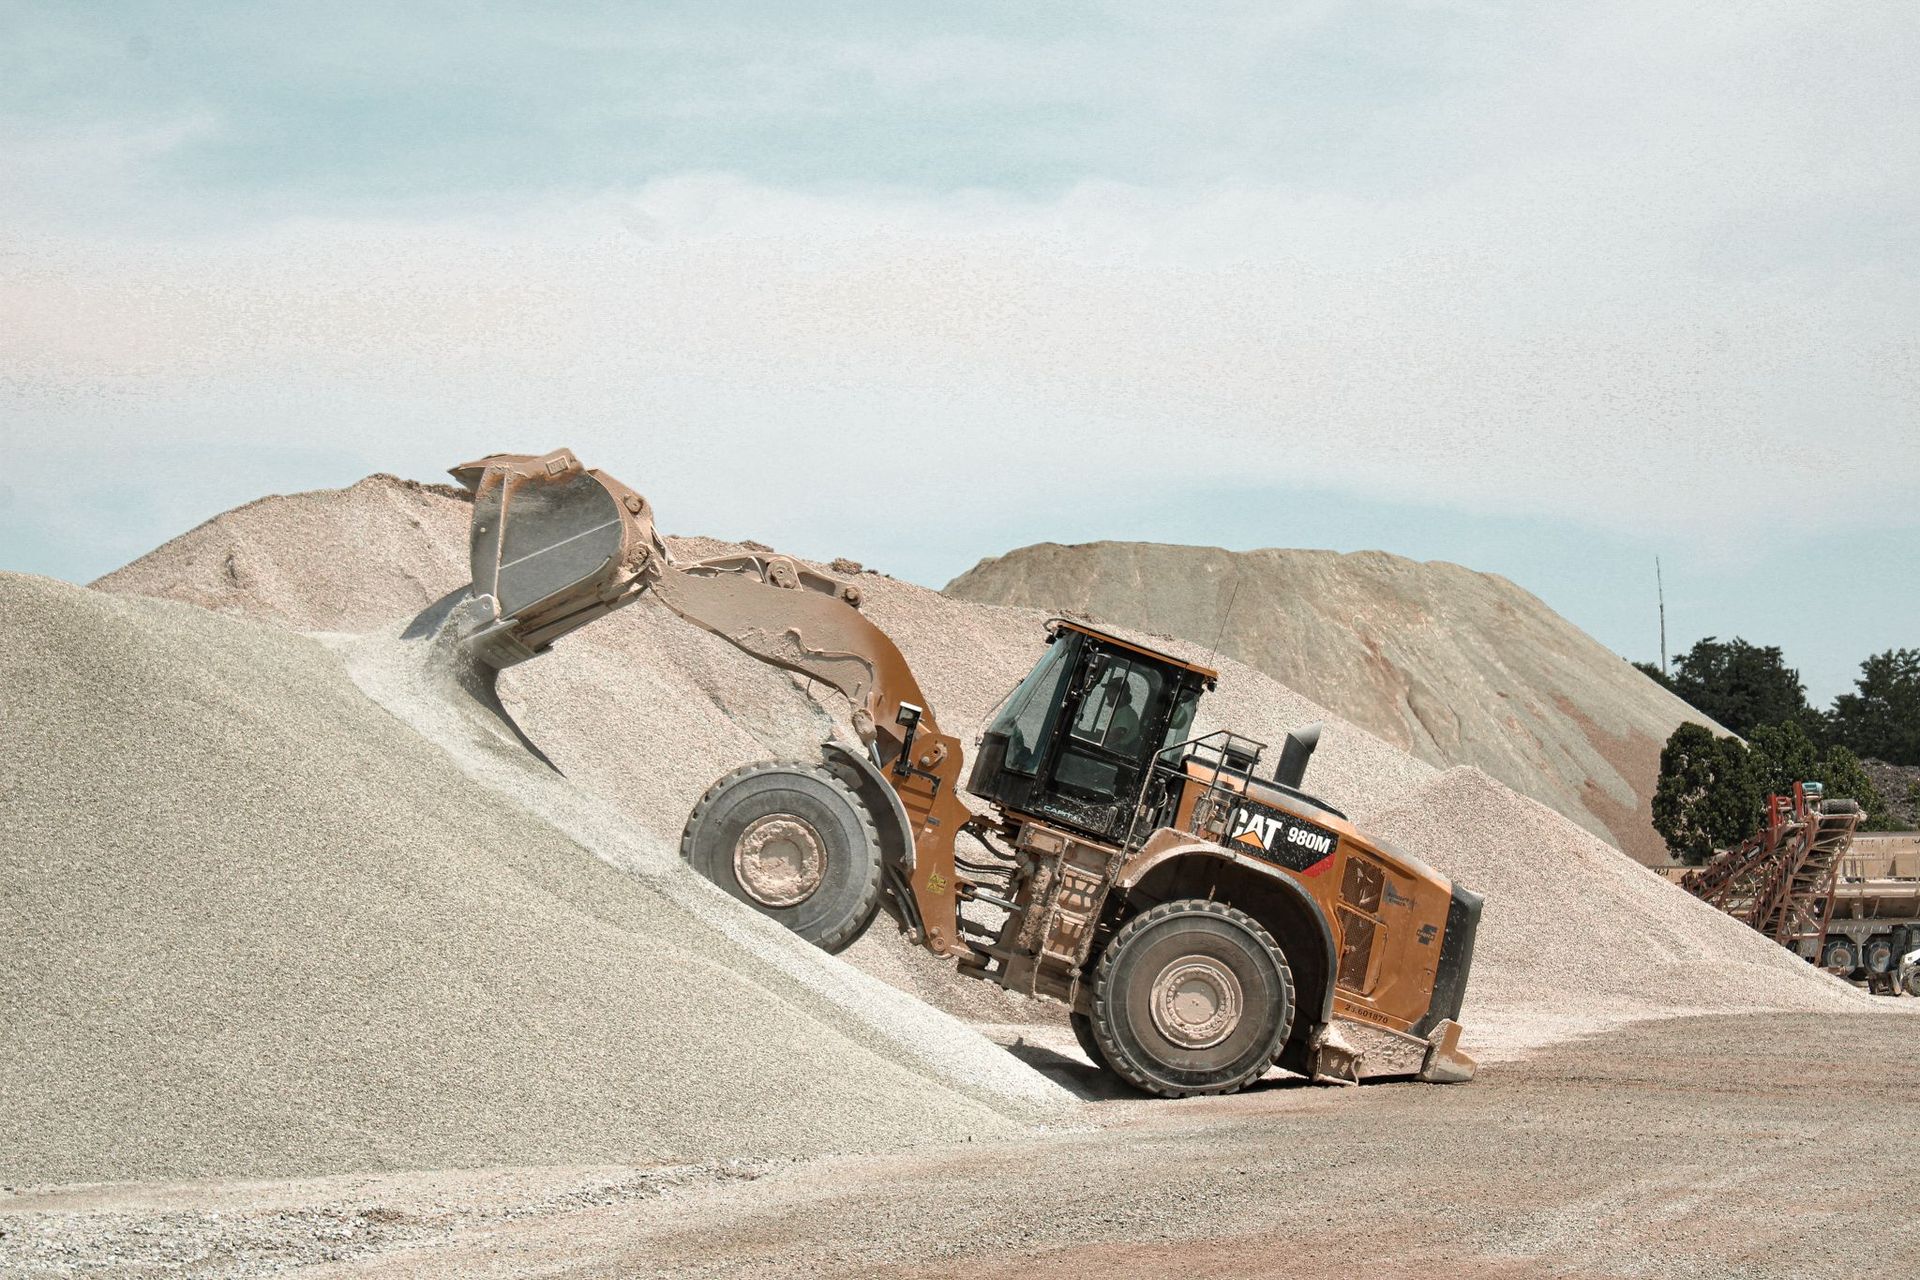 Farmer Companies’ mines produce the highest quality frac sand in the Midwest & beyond